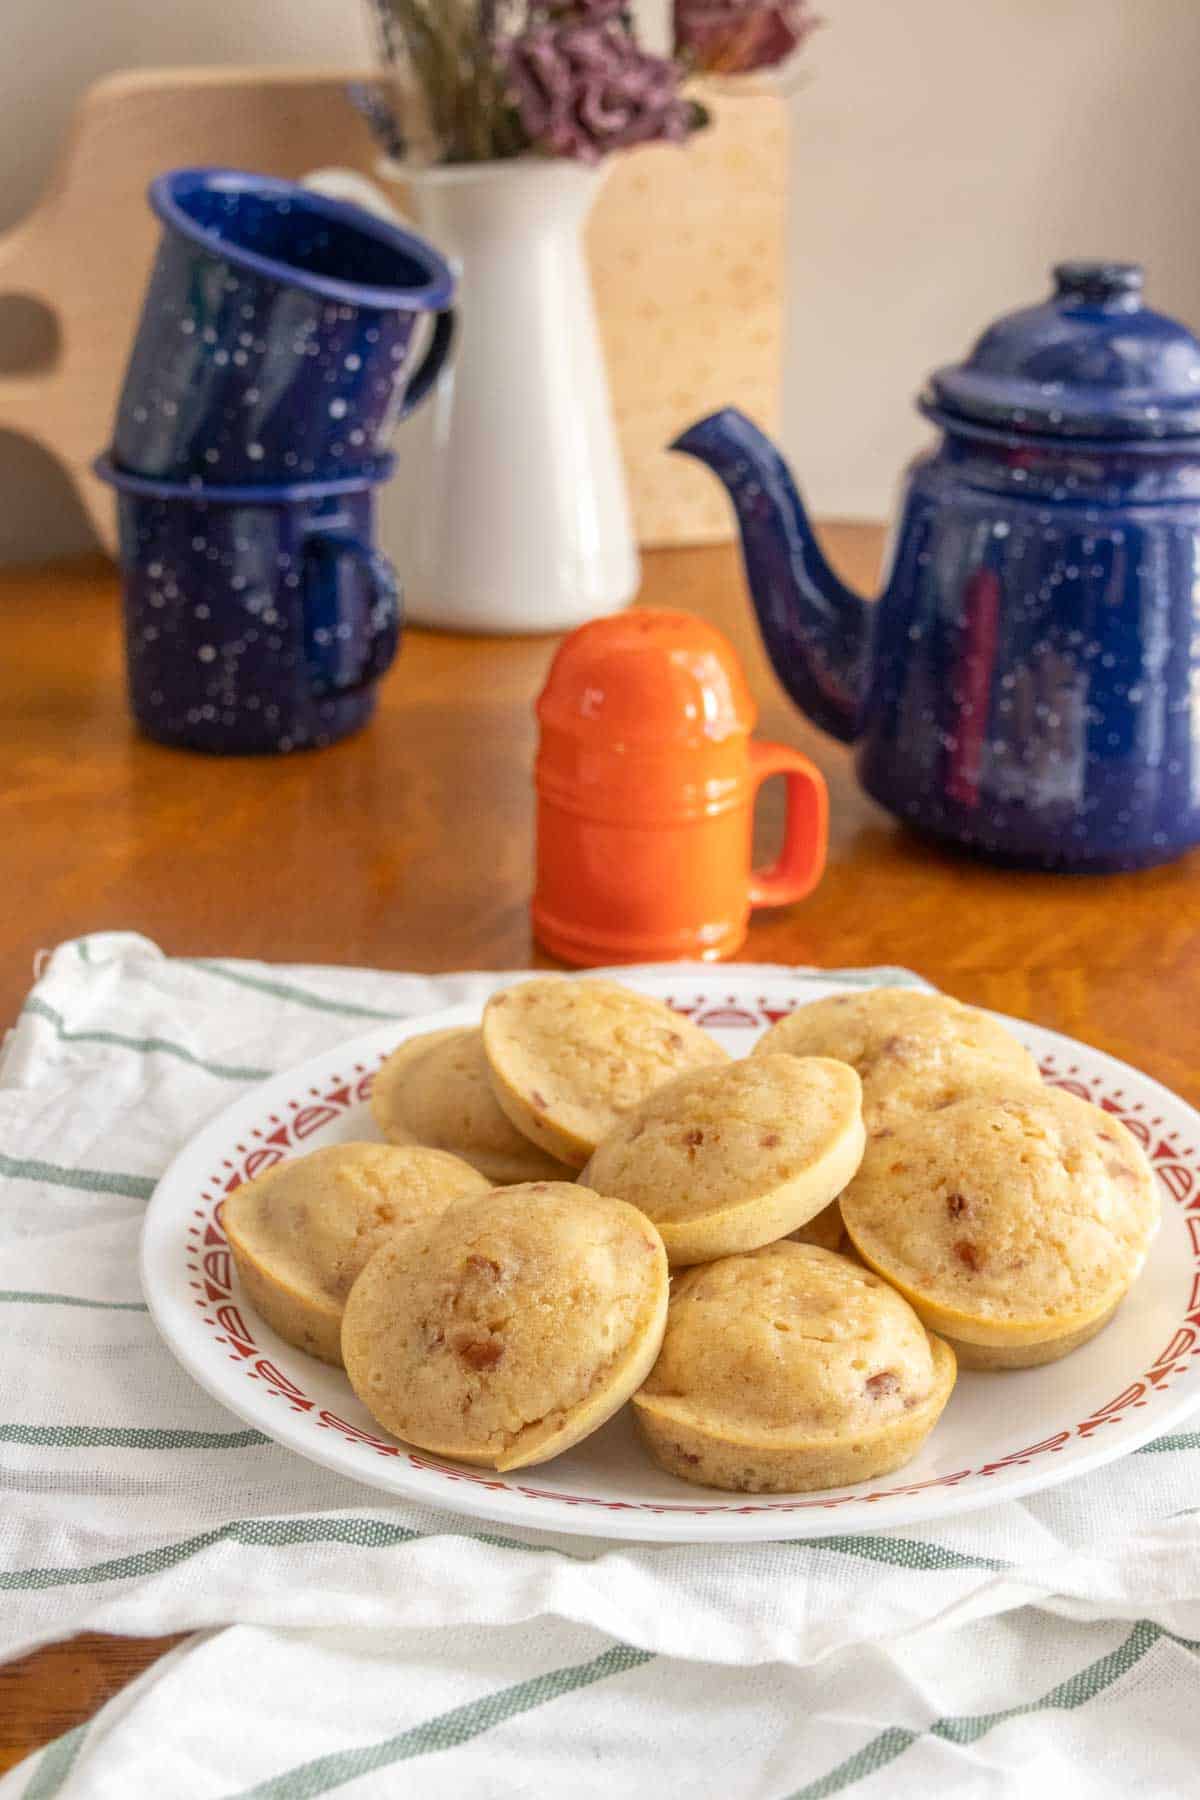 A plate of mini pancakes on a table next to a teapot.